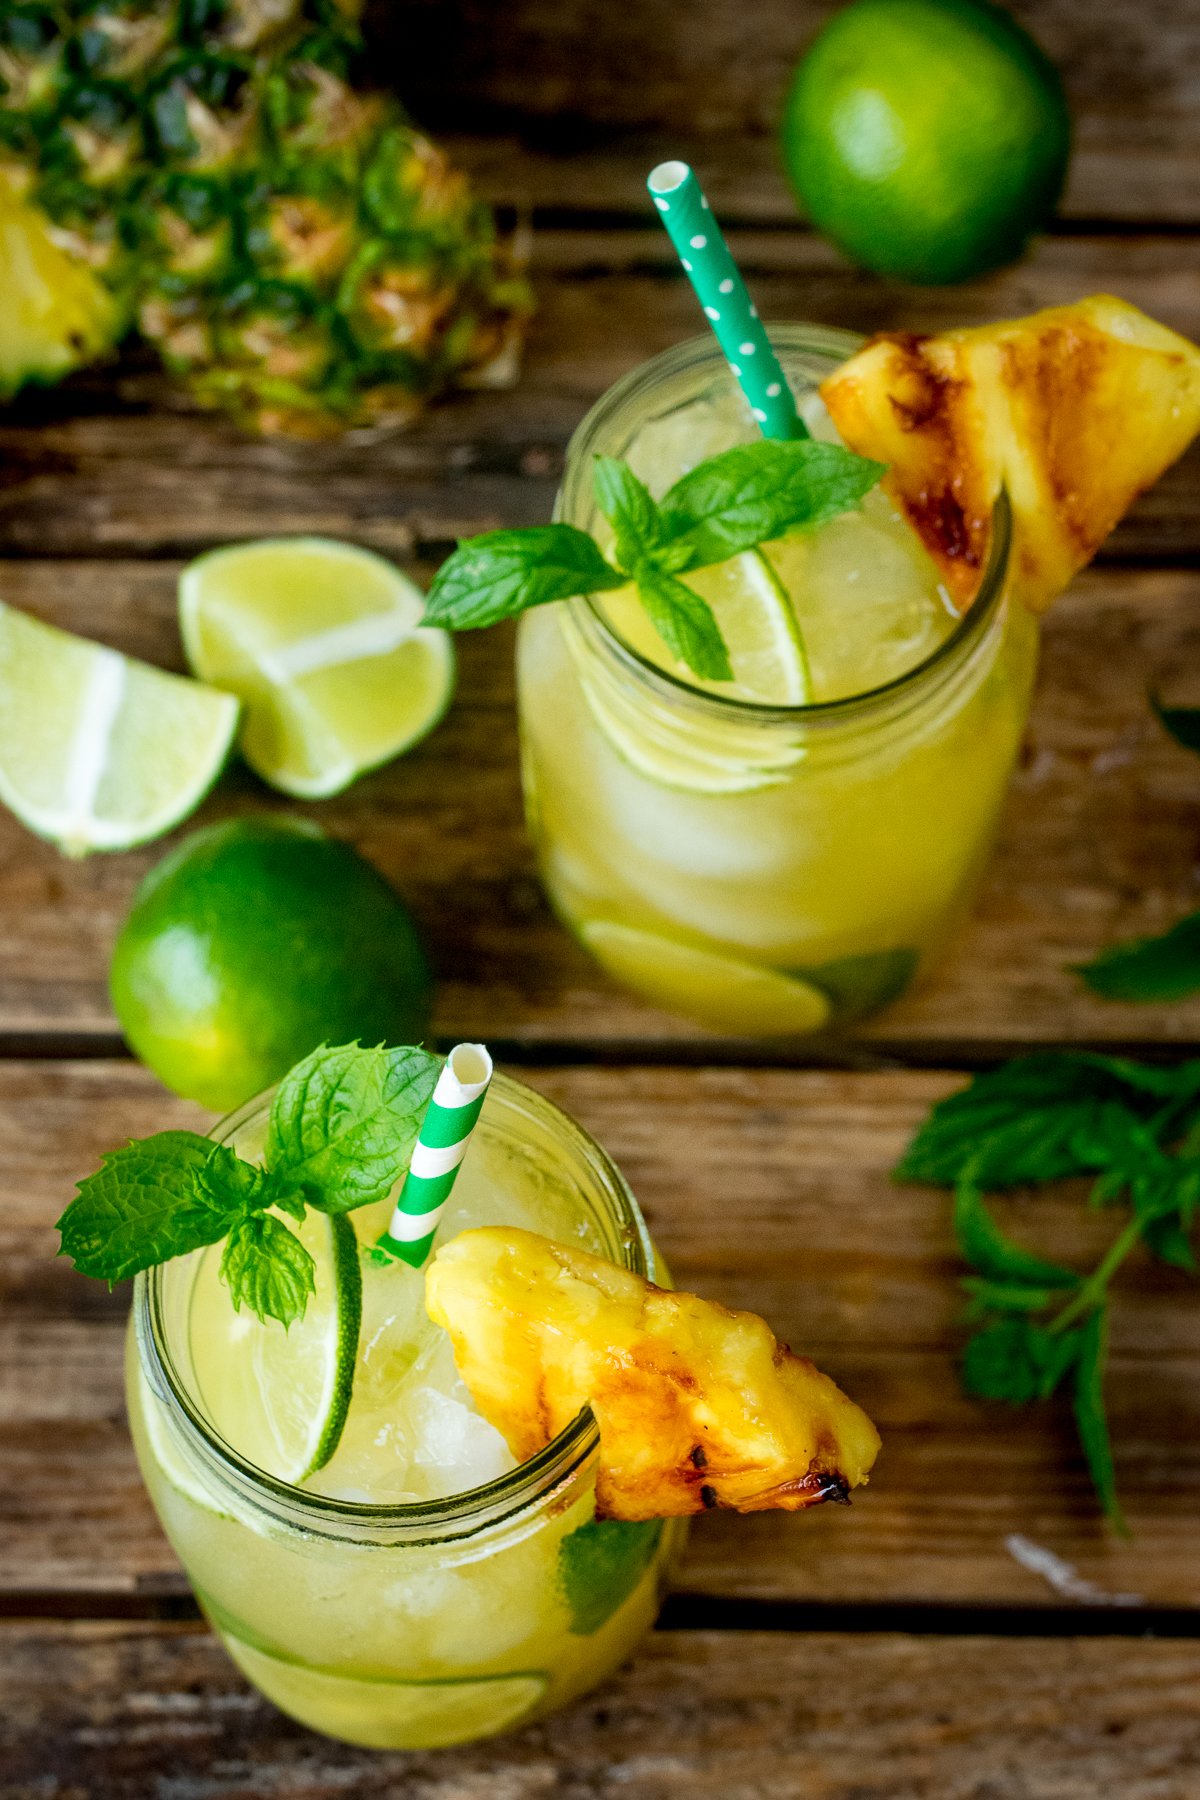 Overhead image of 2 mason jars filled with Pineapple Ginger Mojitos and decorated with mint leaves and caramelized pineapple.